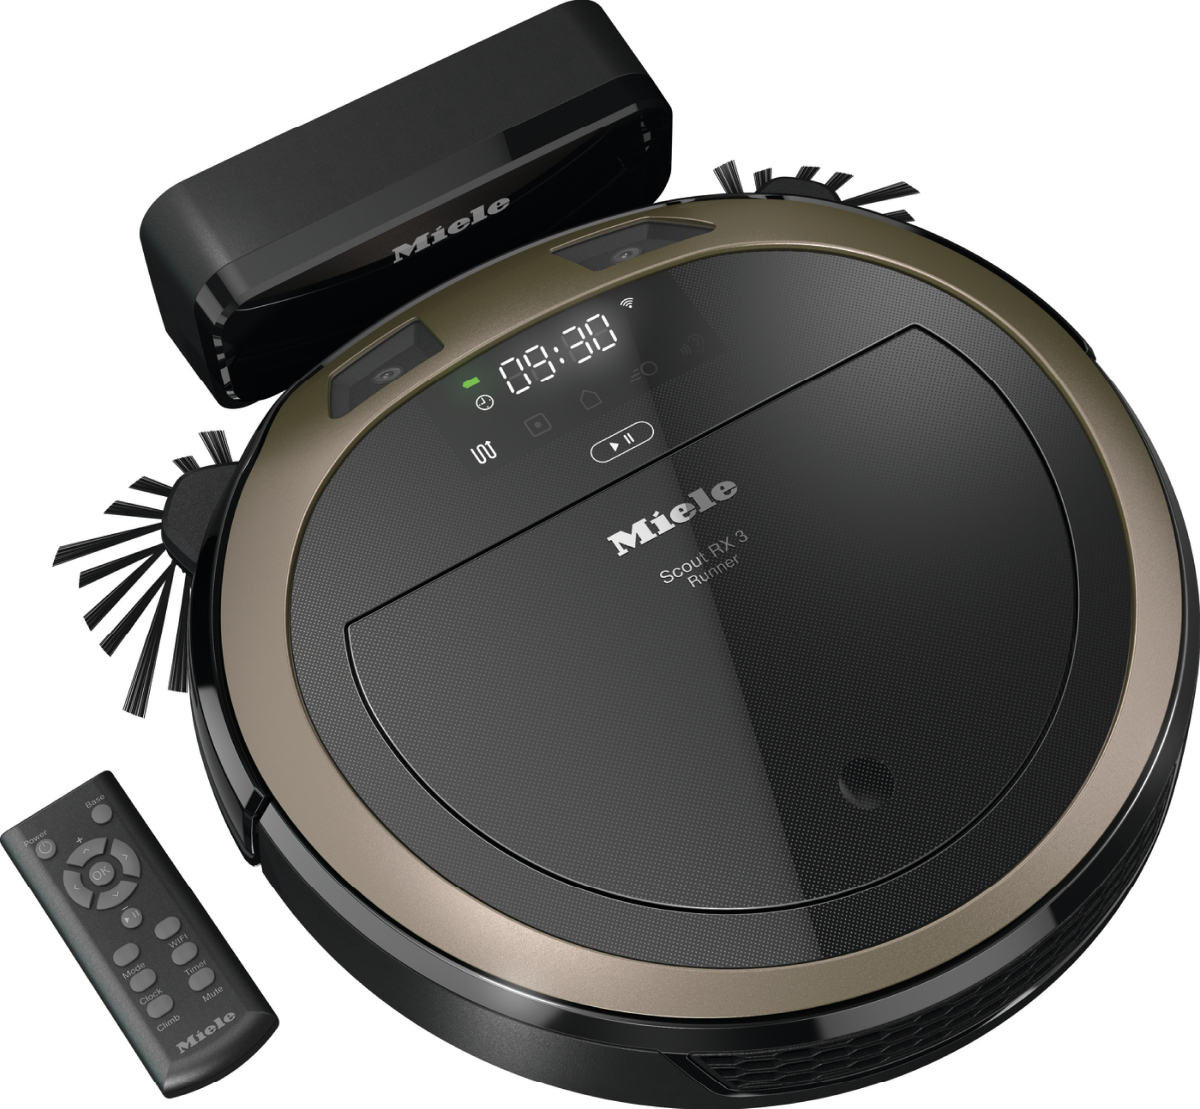 Miele Scout RX3 Runner robot vacuum